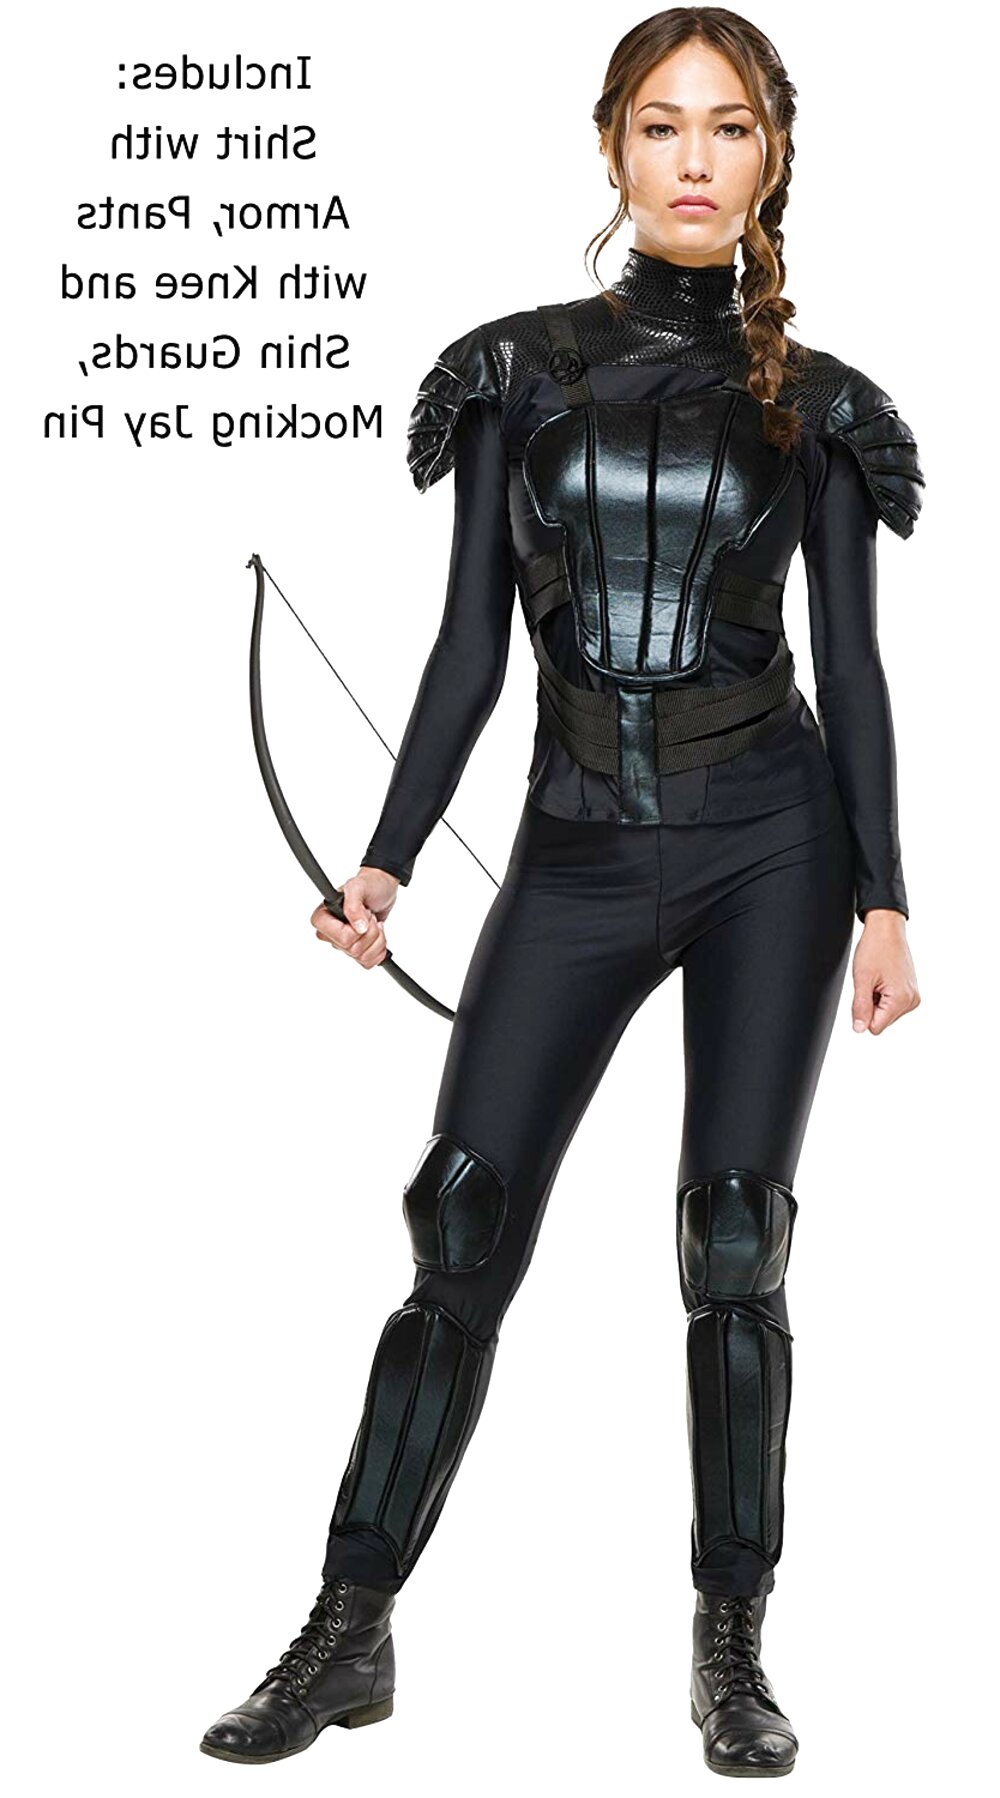 Katniss Everdeen cosplay (Mockingjay outfit) by cosplaycara